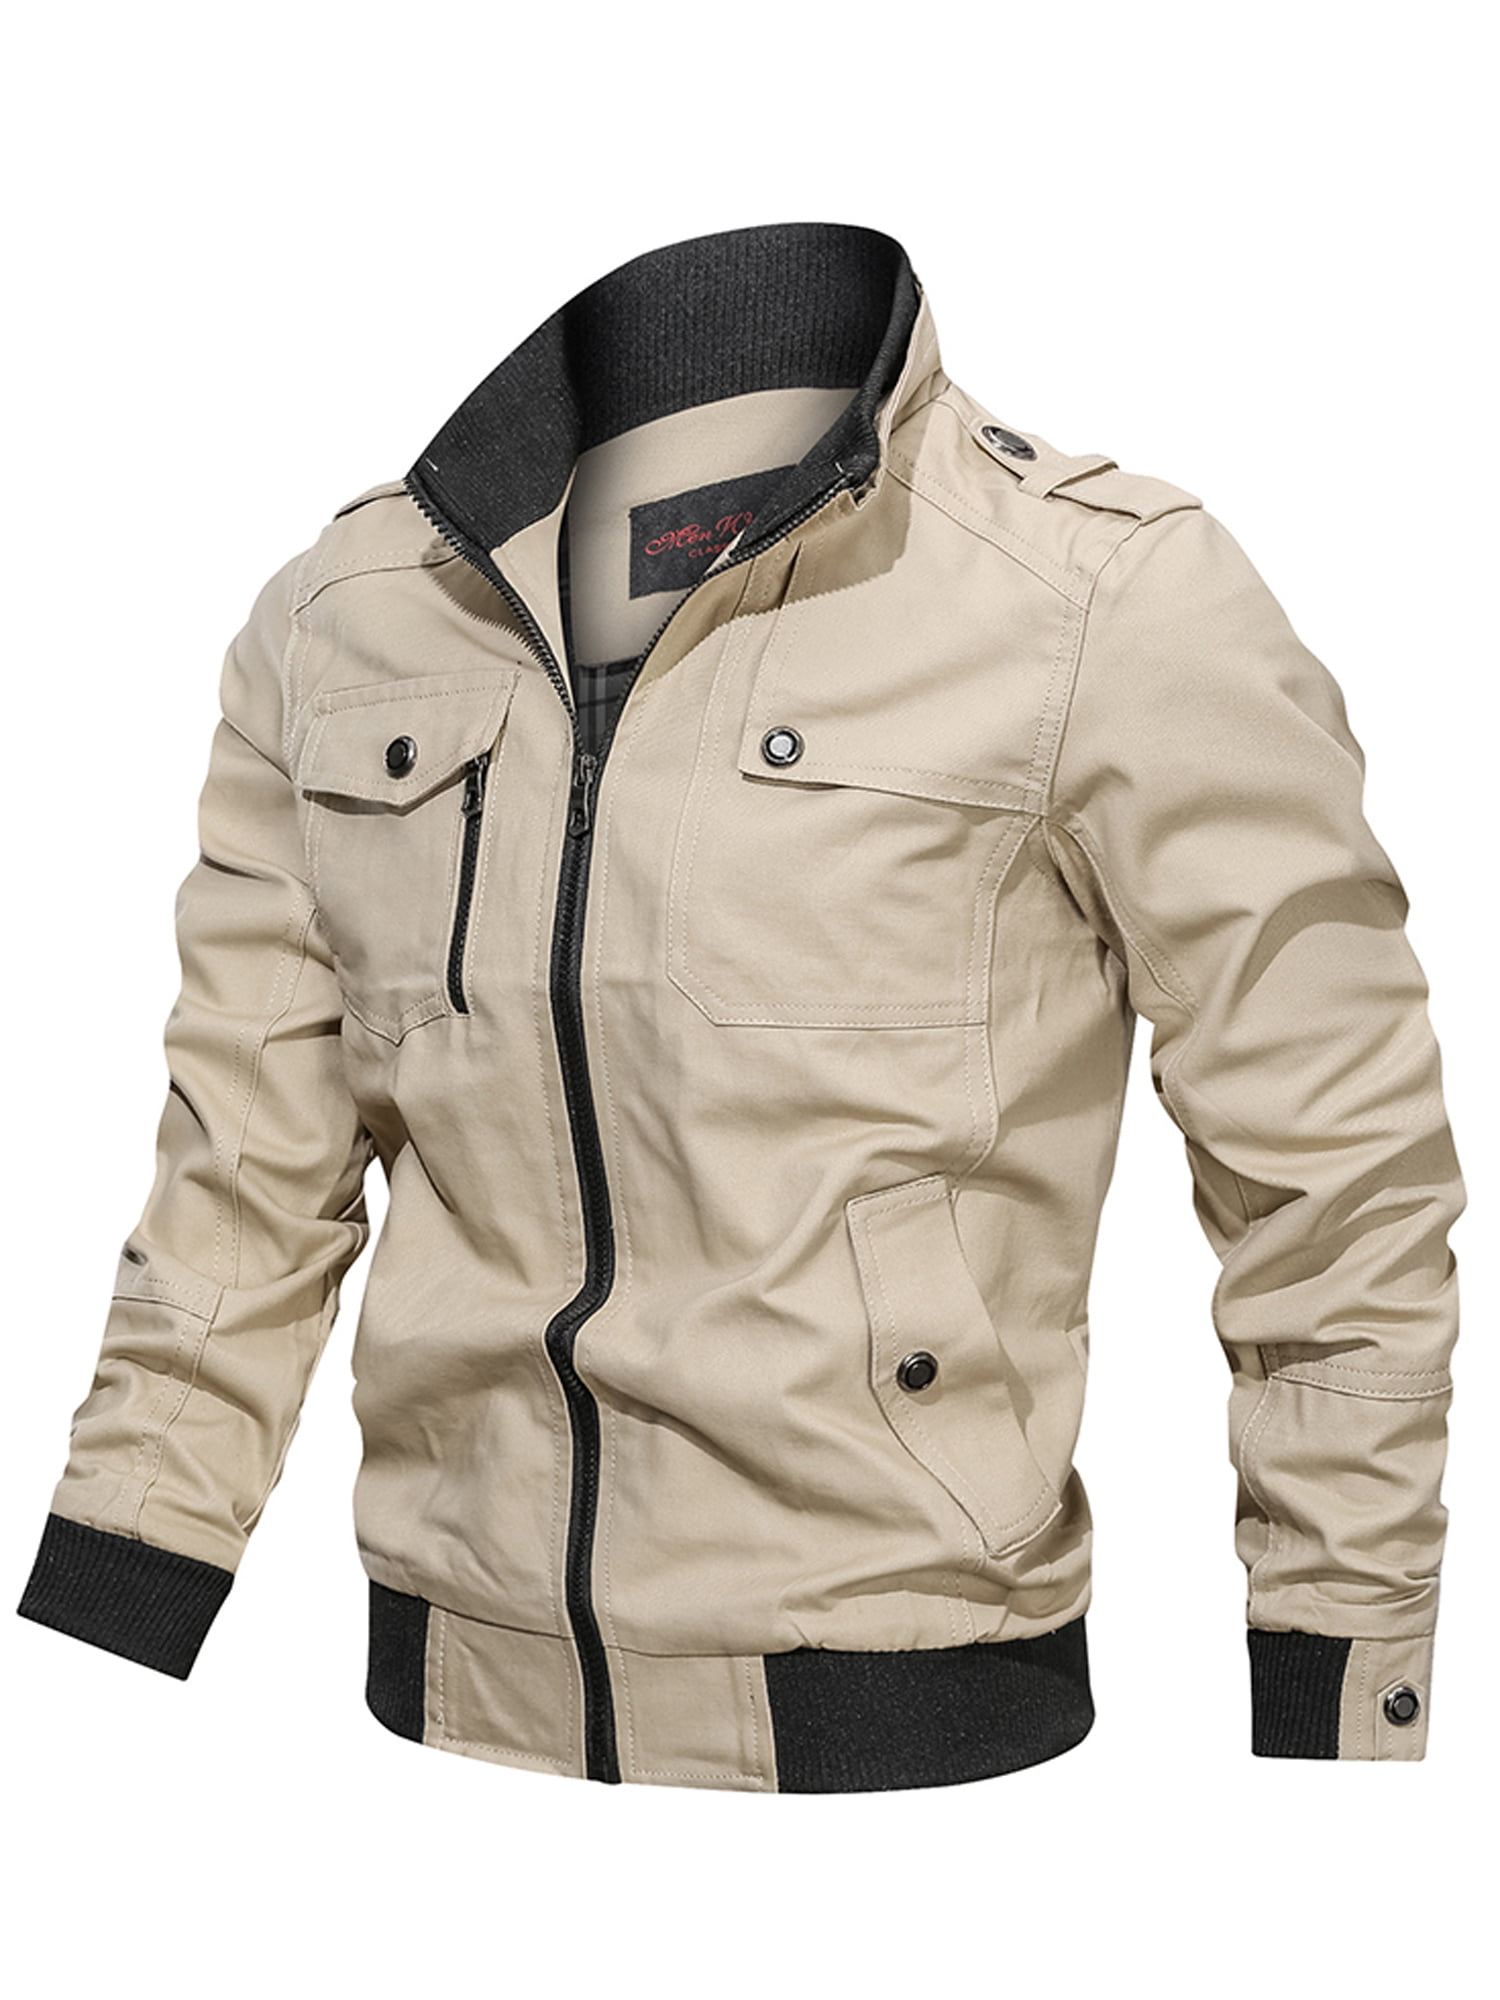 Details about   Men Winter Coat Tactical Military Outwear Overcoat Button Jacket Casual Top Warm 